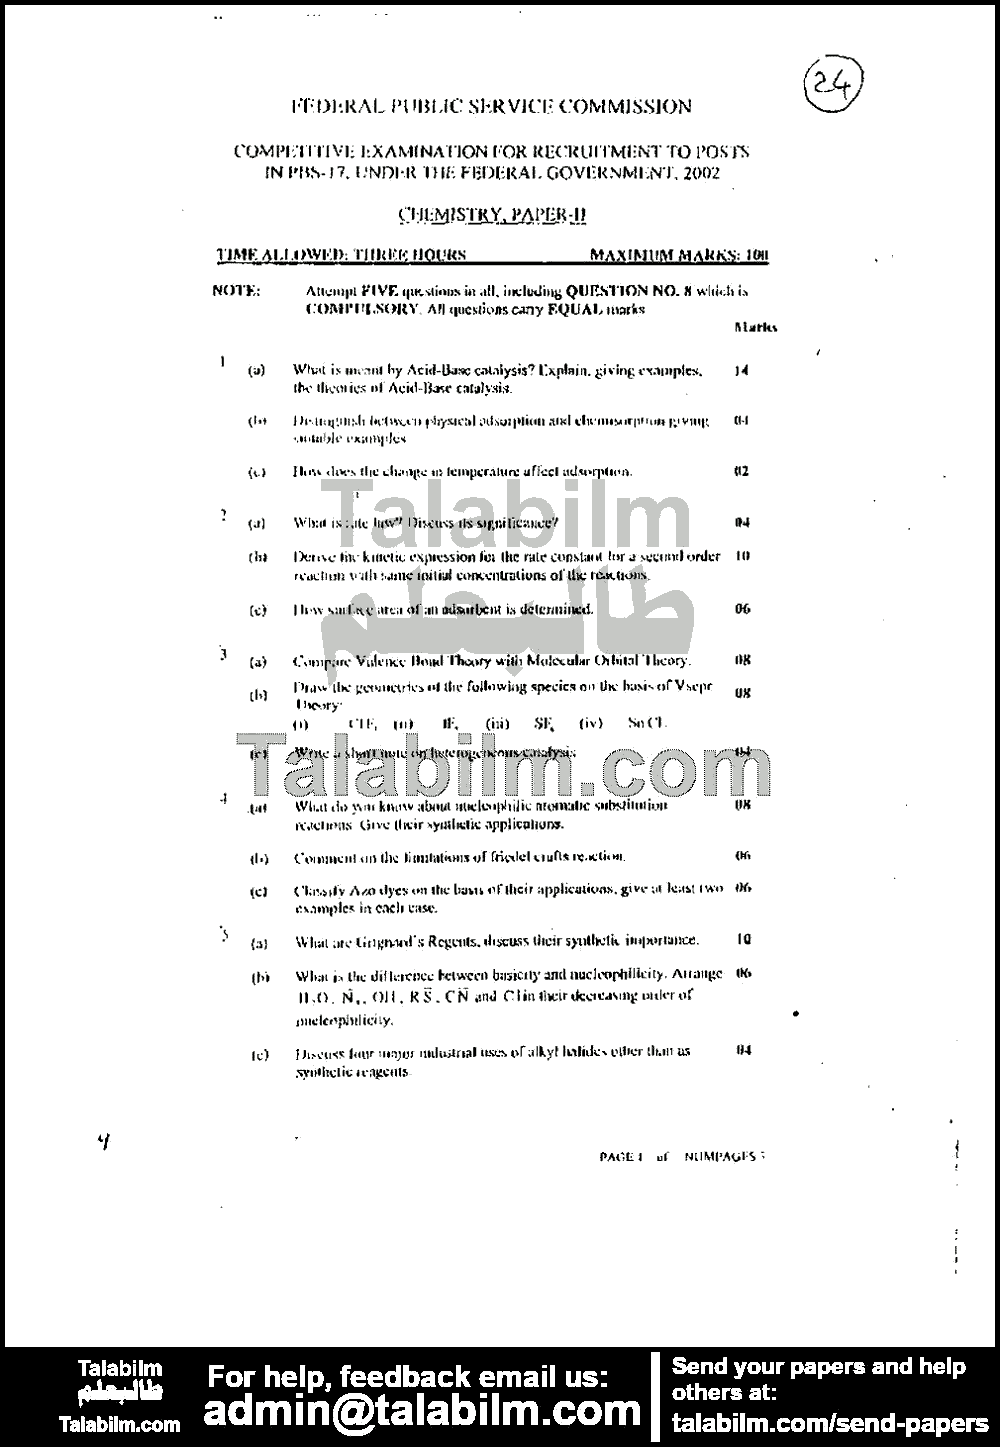 Chemistry 0 past paper for 2002 Page No. 3